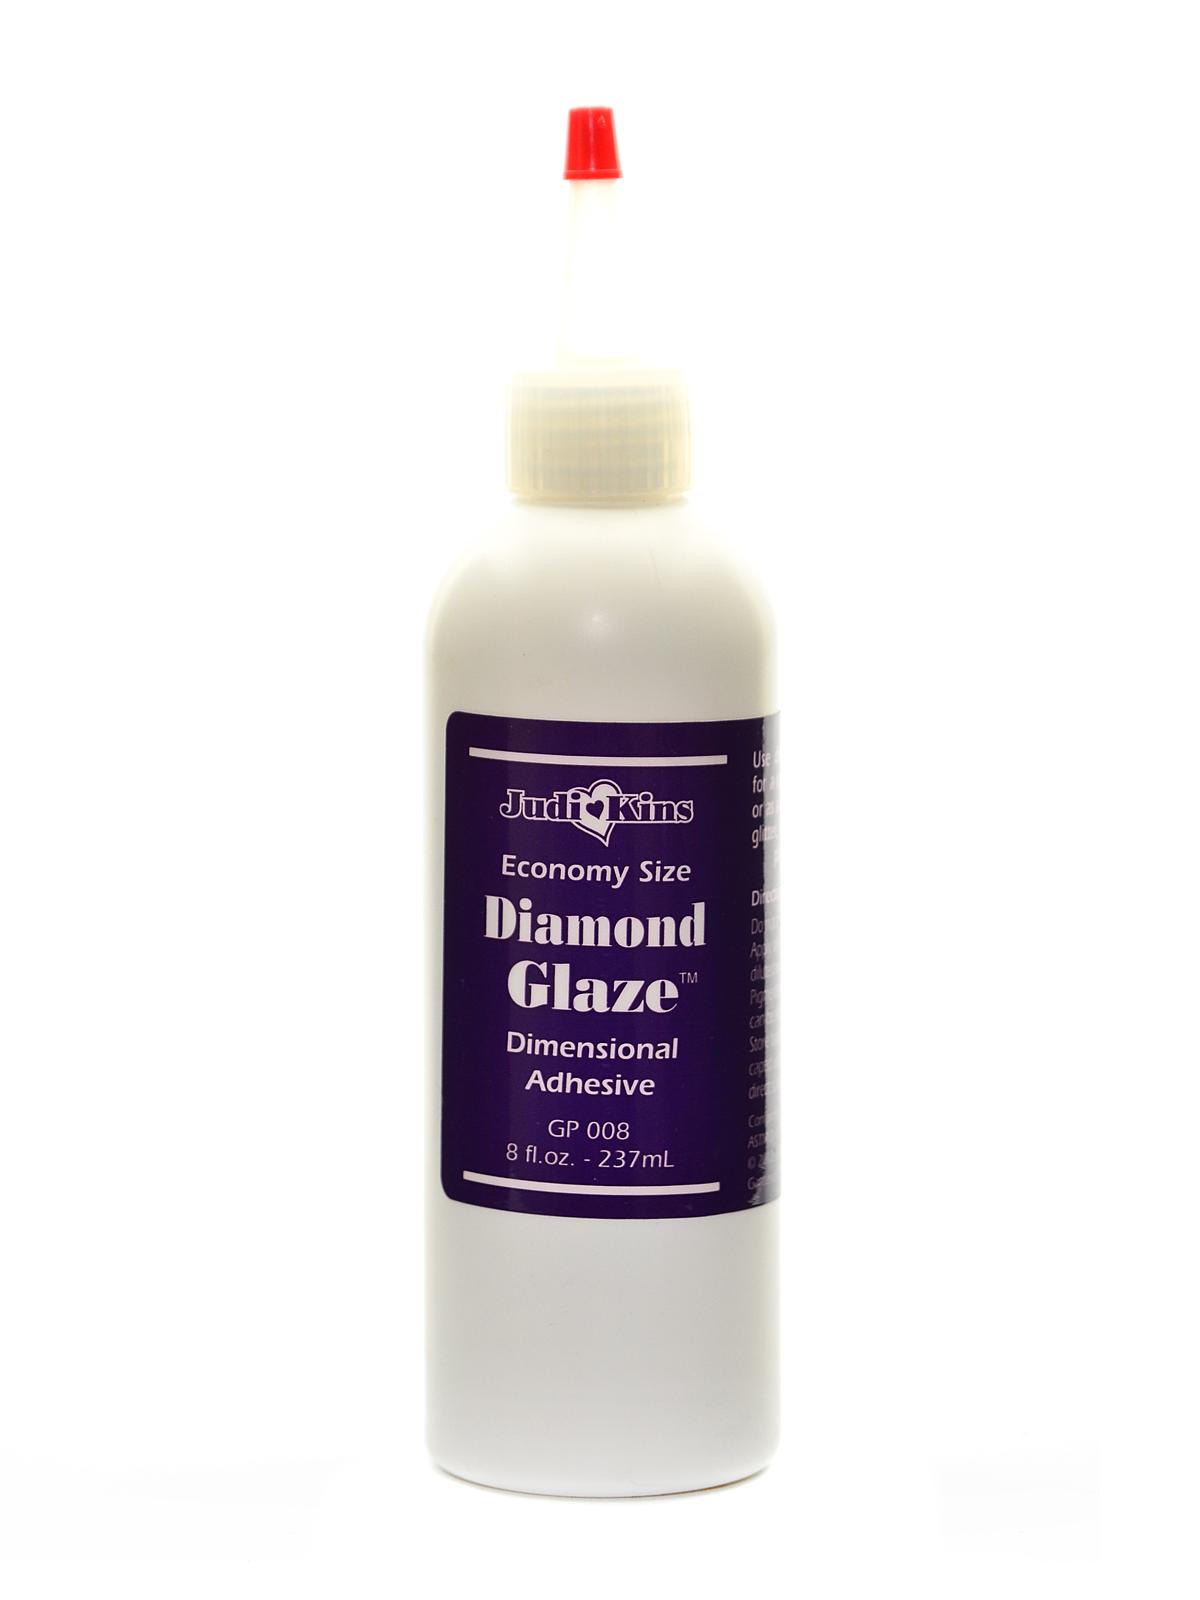 How to Use Diamond Glaze with Glitter for a Permanent Adhesive